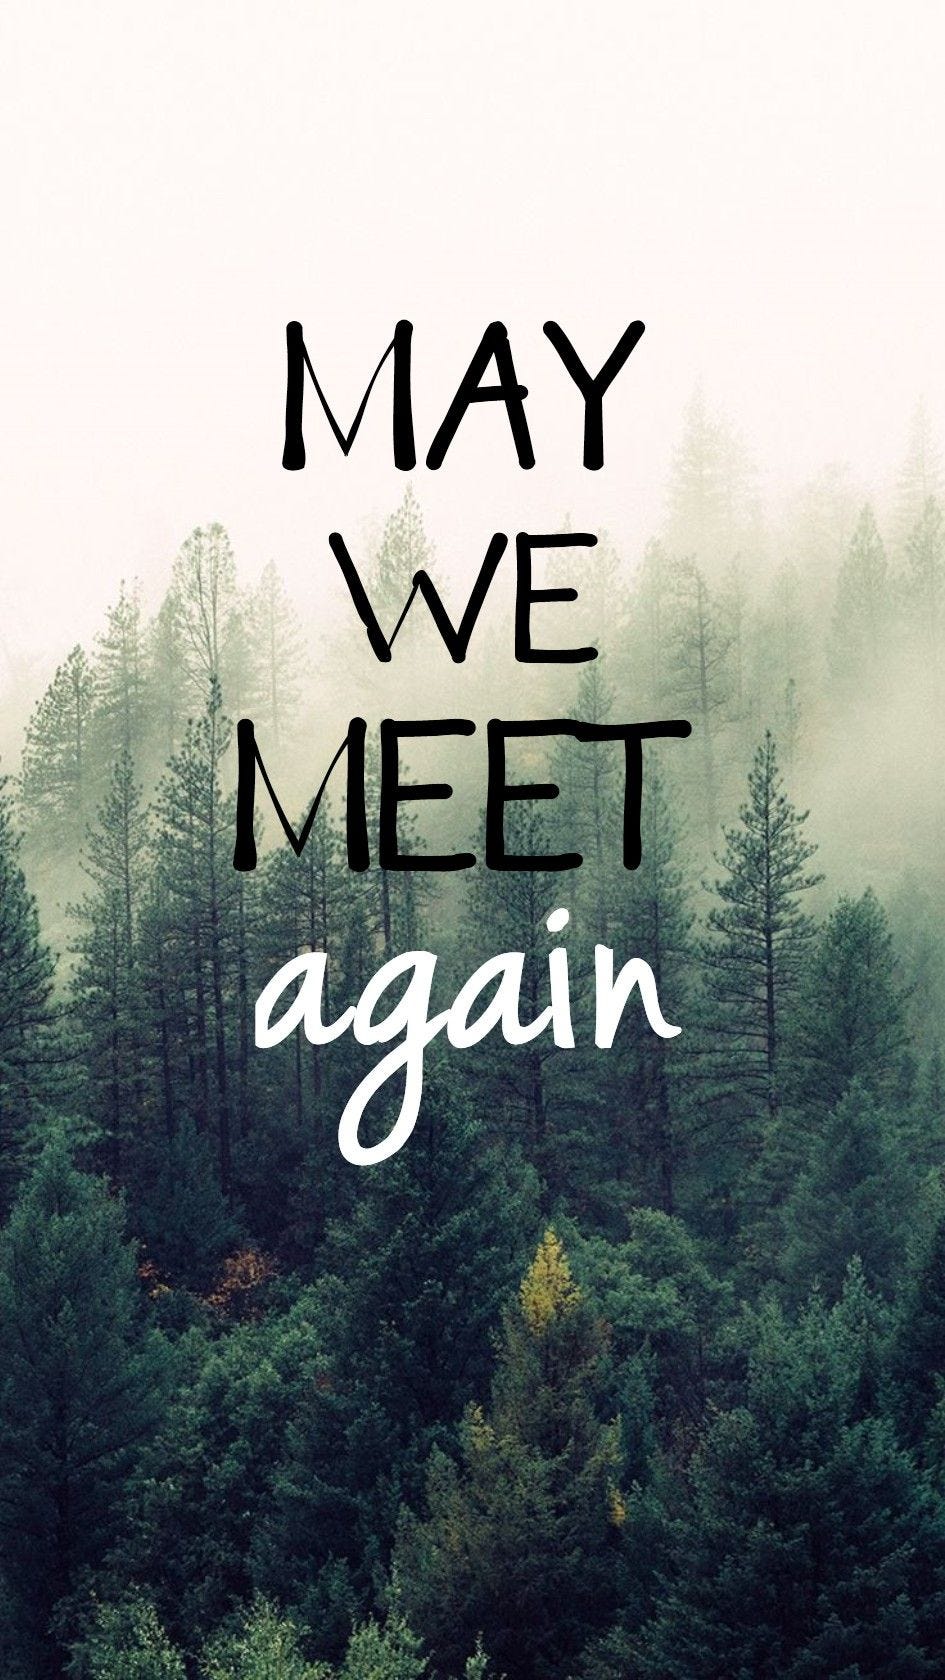 May we meet again... | The 100 quotes, The 100, The 100 poster